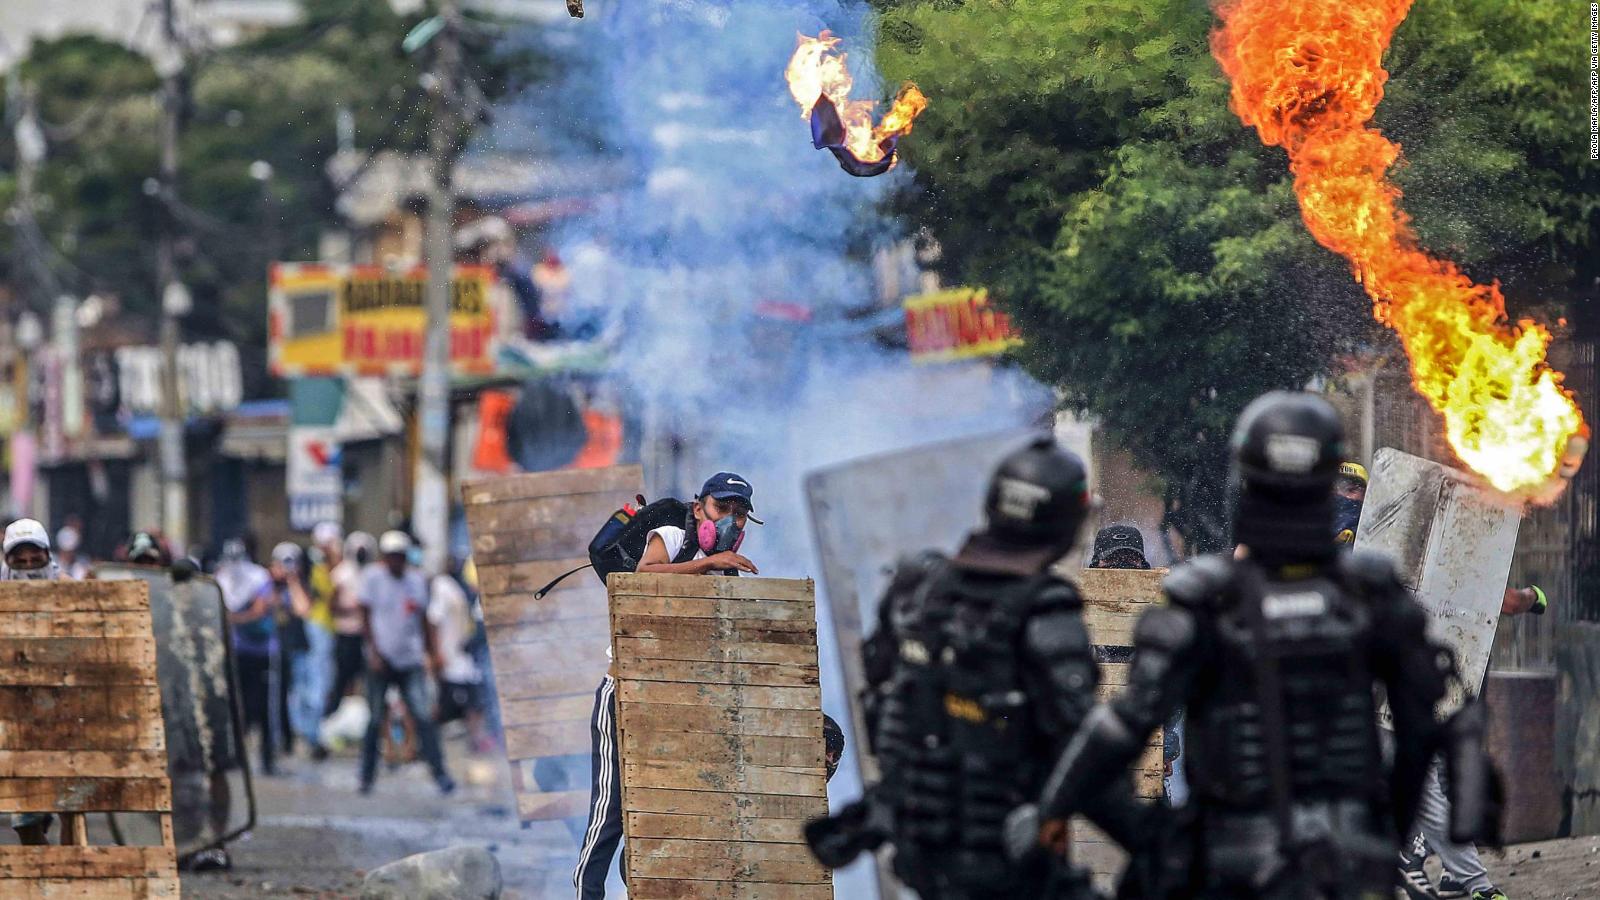 Ombudsman’s Office reports 17 deaths in protests in Colombia